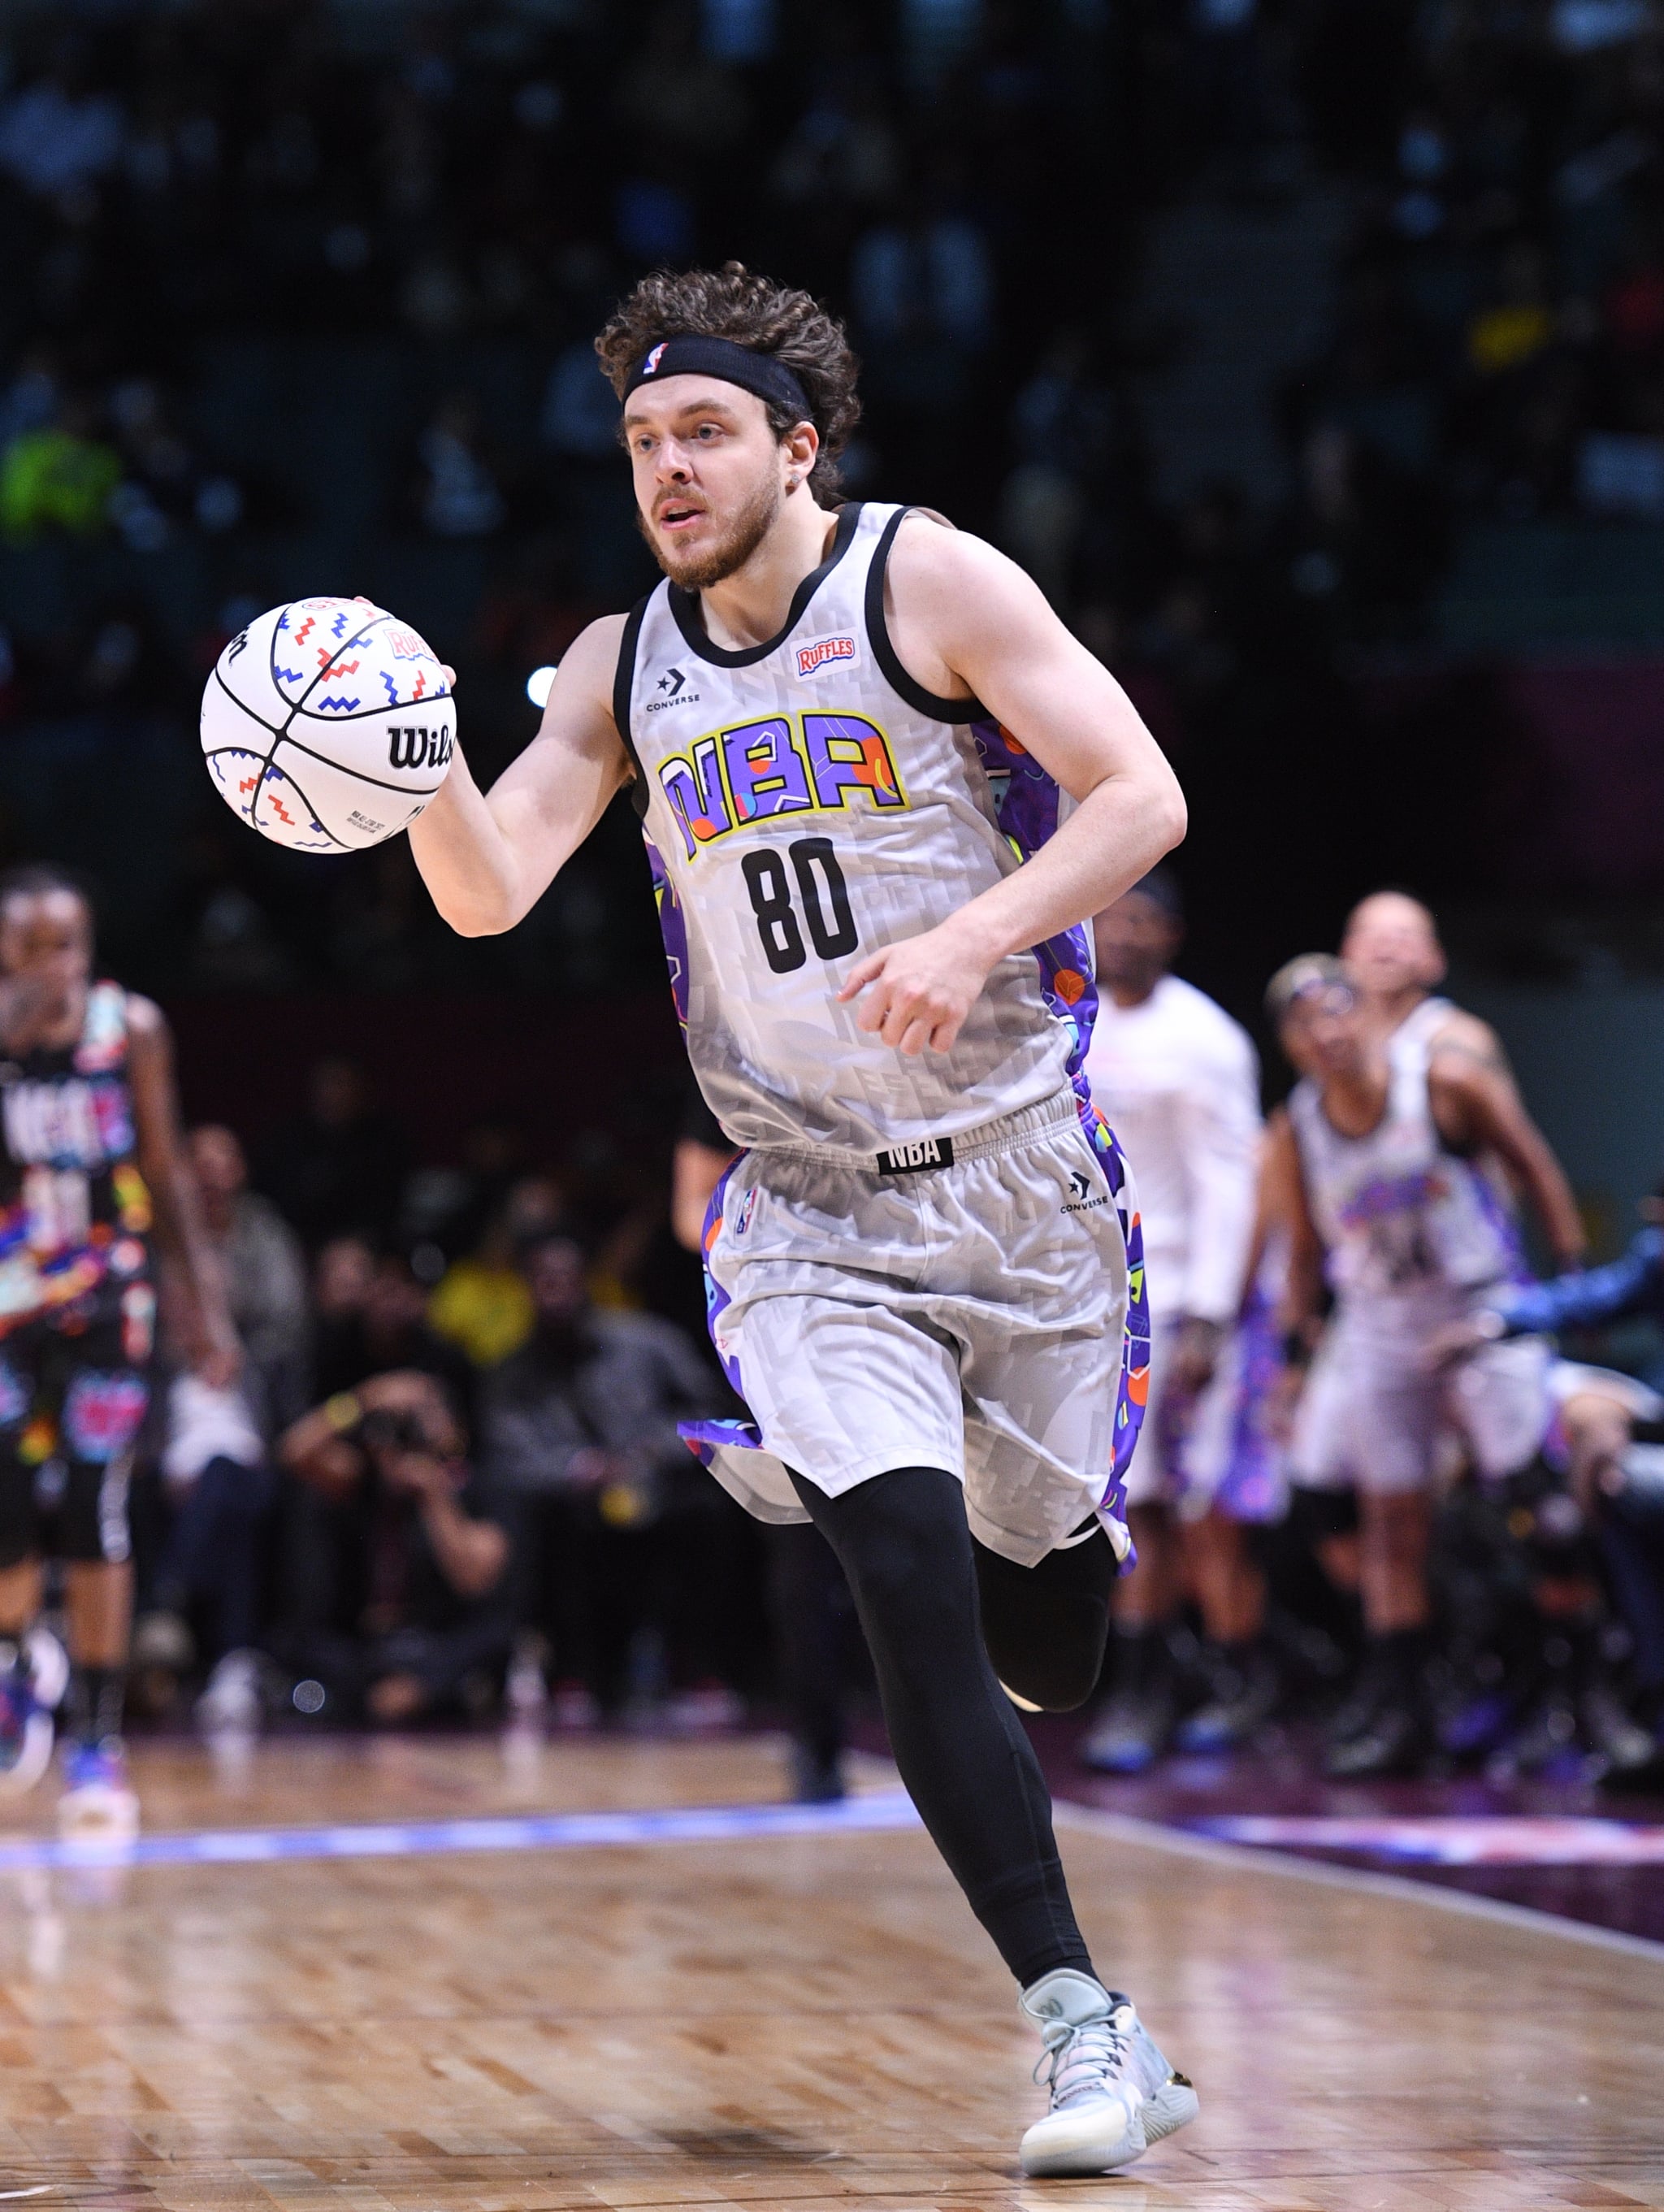 CLEVELAND, OH - FEBRUARY 18: Jack Harlow of Team Nique dribbles the ball during the Ruffles NBA All-Star Celebrity Game as part of 2022 NBA All Star Weekend on Friday, February 18, 2022 at Wolstein Centre in Cleveland, Ohio. NOTE TO USER: User expressly acknowledges and agrees that, by downloading and/or using this Photograph, user is consenting to the terms and conditions of the Getty Images Licence Agreement. Mandatory Copyright Notice: Copyright 2022 NBAE (Photo by Chris Schwegler/NBAE via Getty Images)